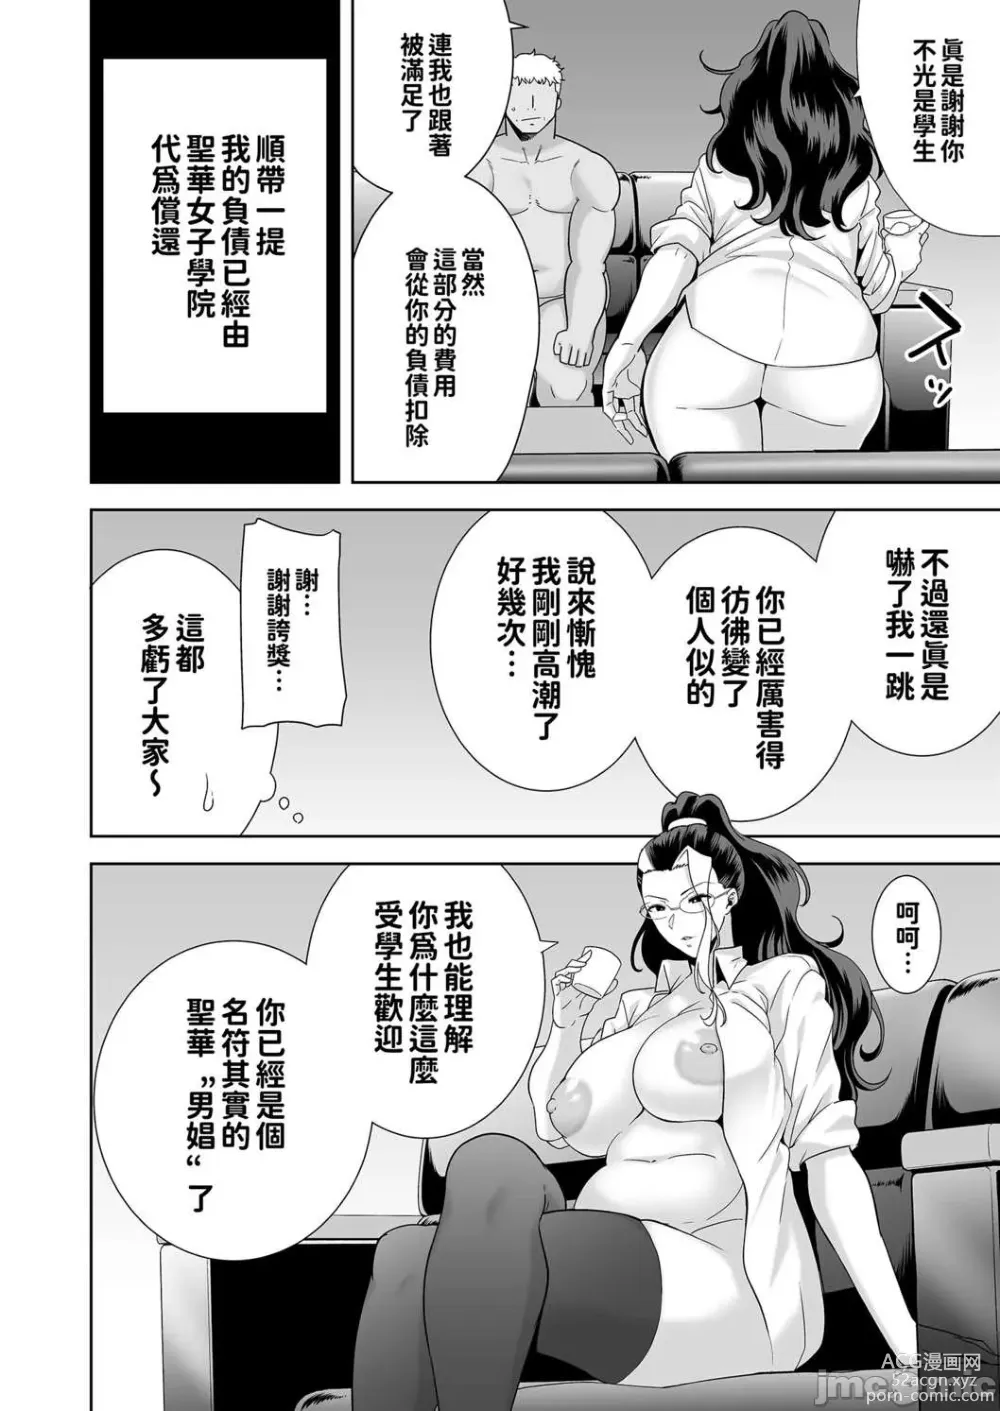 Page 10 of doujinshi 聖華女学院高等部公認竿おじさん 5